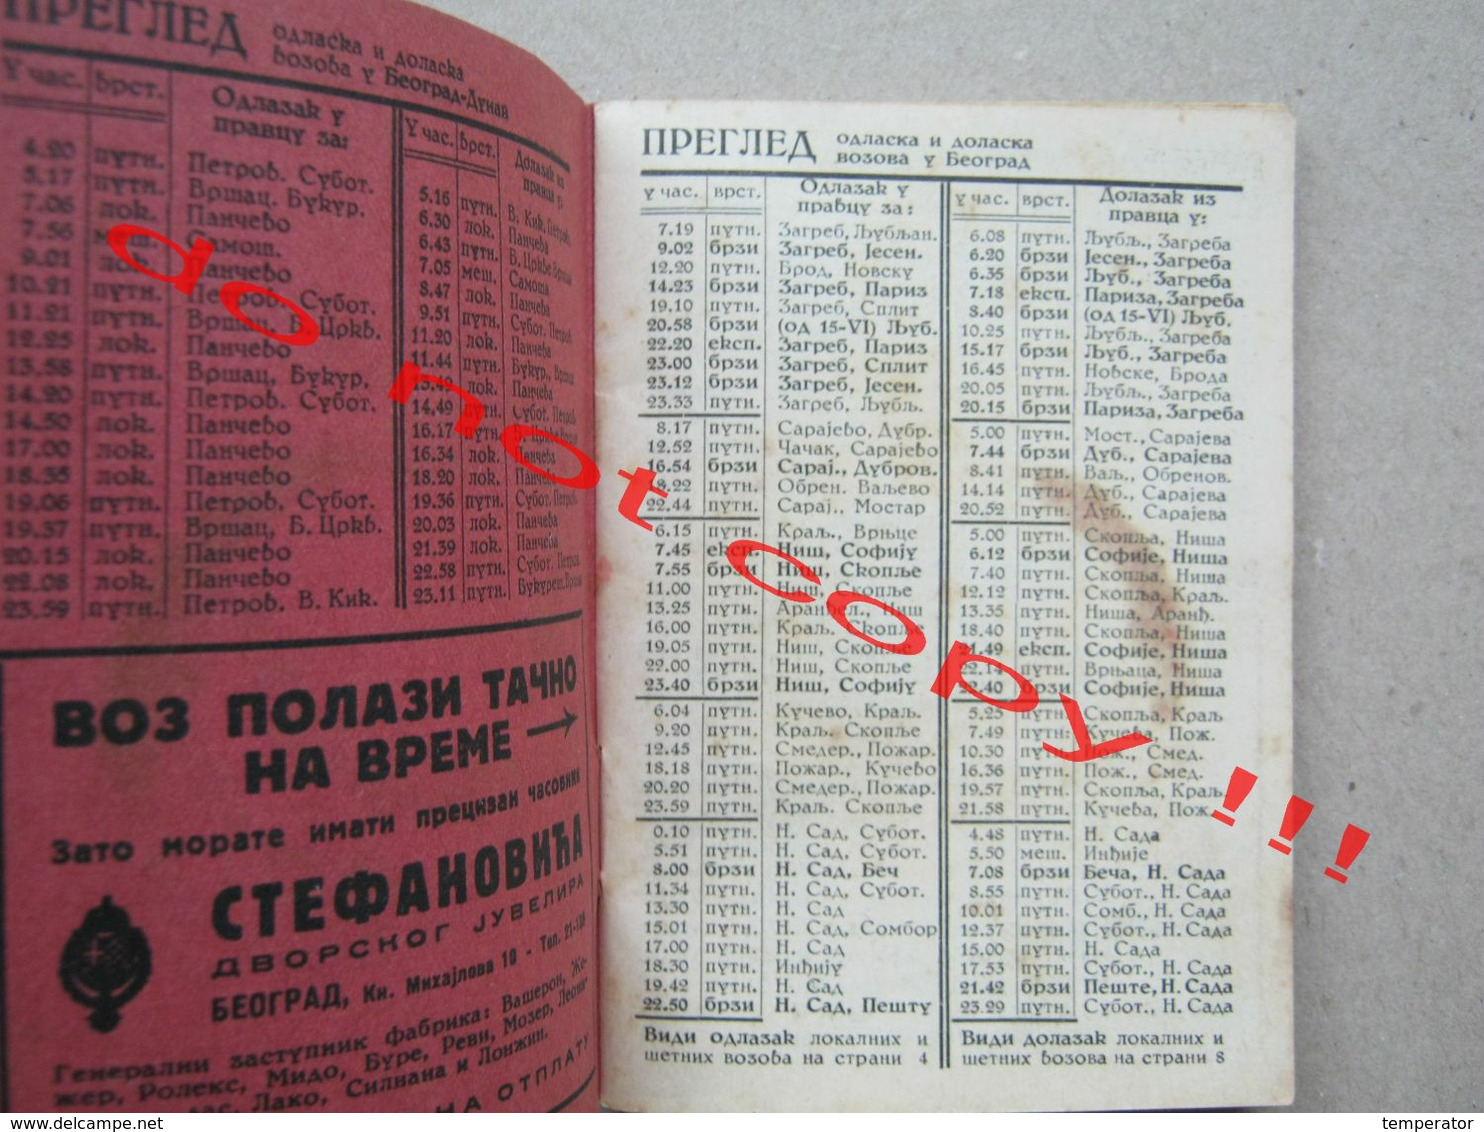 Kingdom Of Yugoslavia / Railway Timetable,train Schedules,buses,boats And Air Traffic With Pricelist And Map ( 1940 ) - Europe